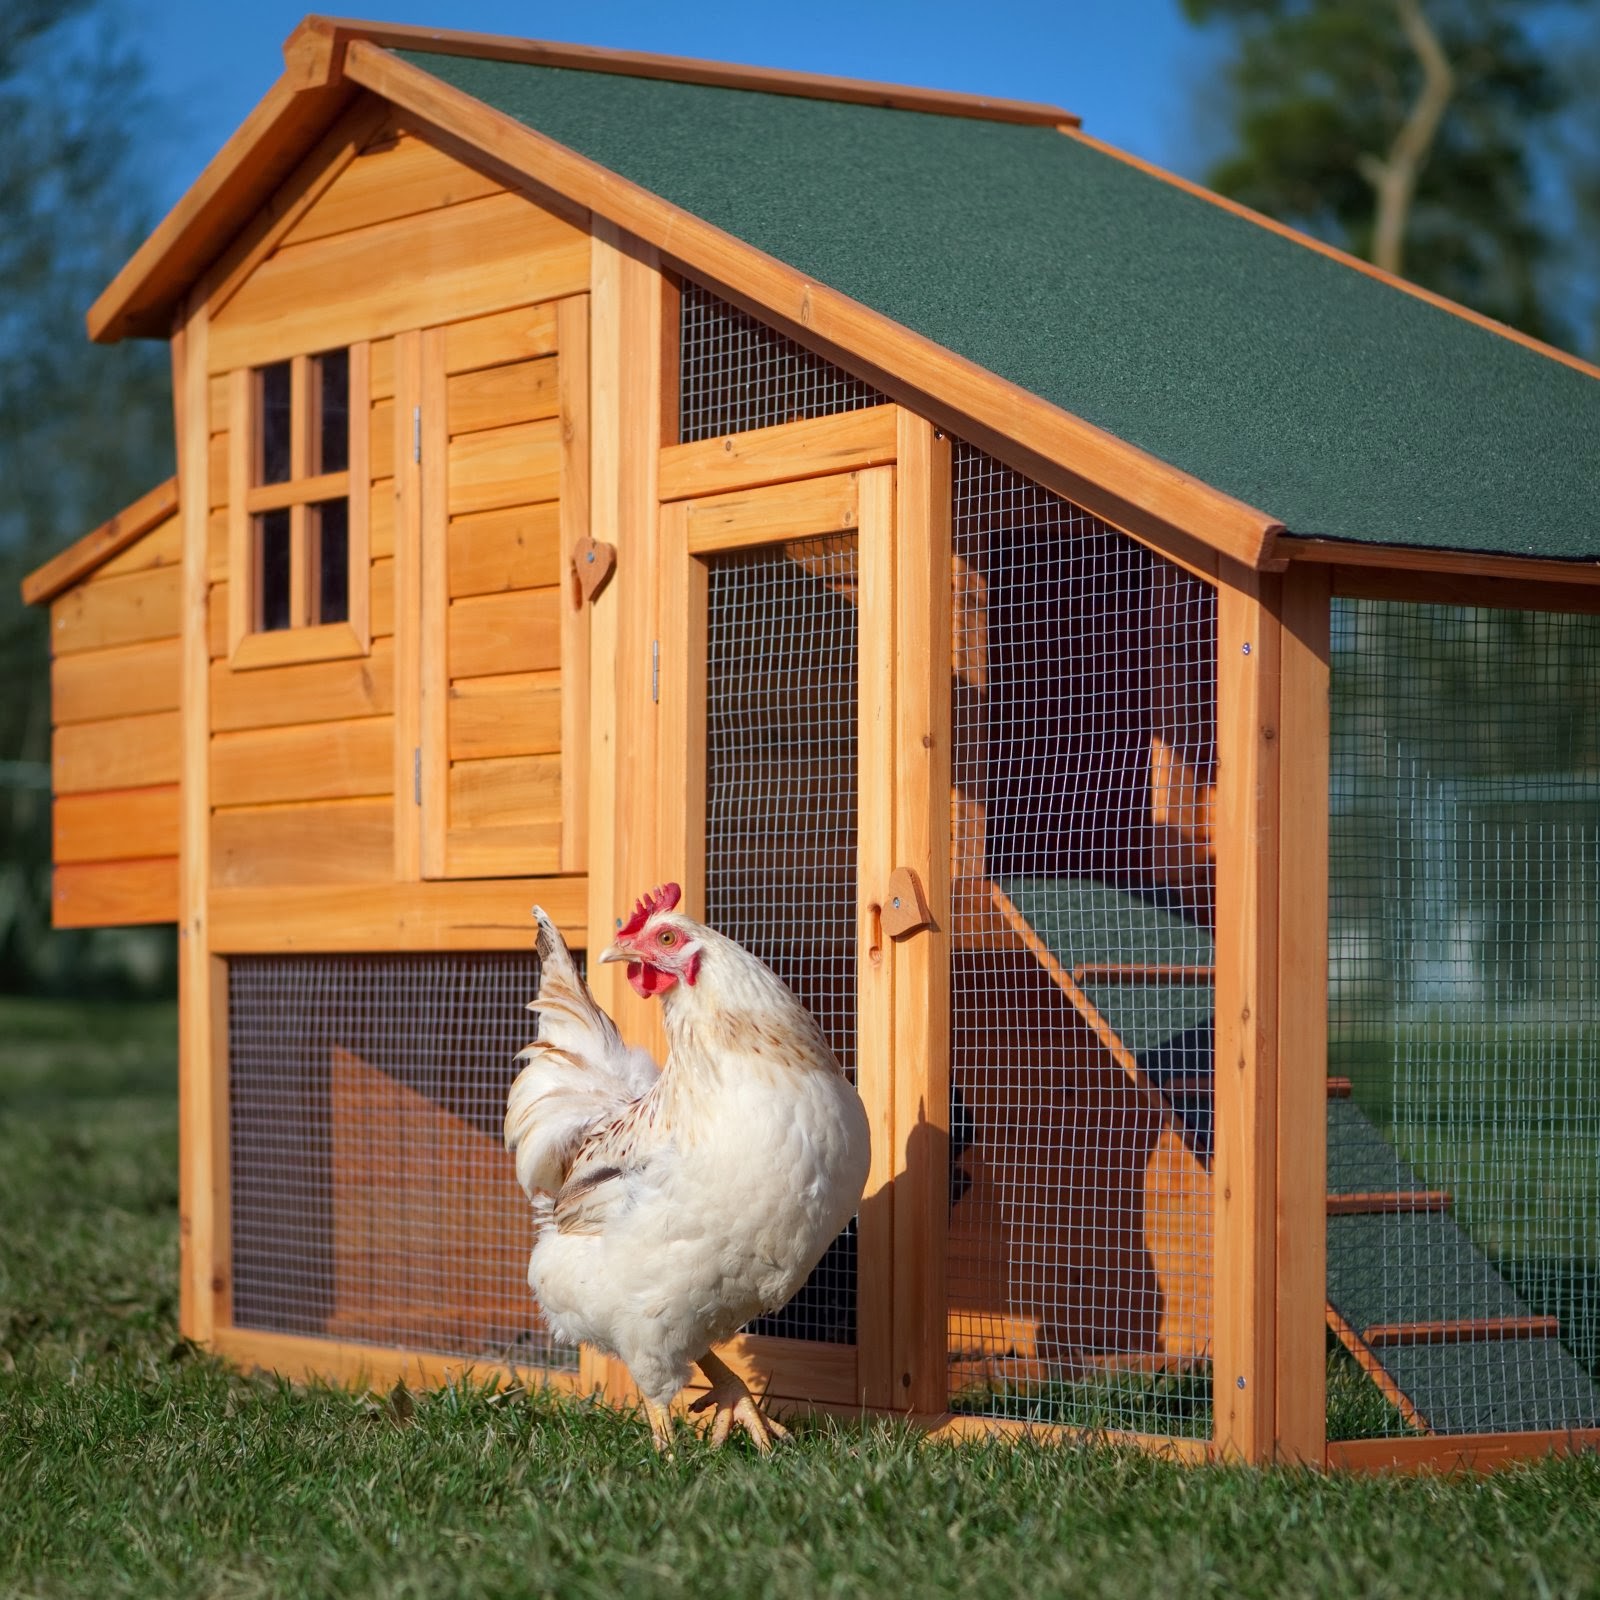 Chicken House Plans: Truths Of Building A Chicken Coop - +BuilDing A Chicken Coop7